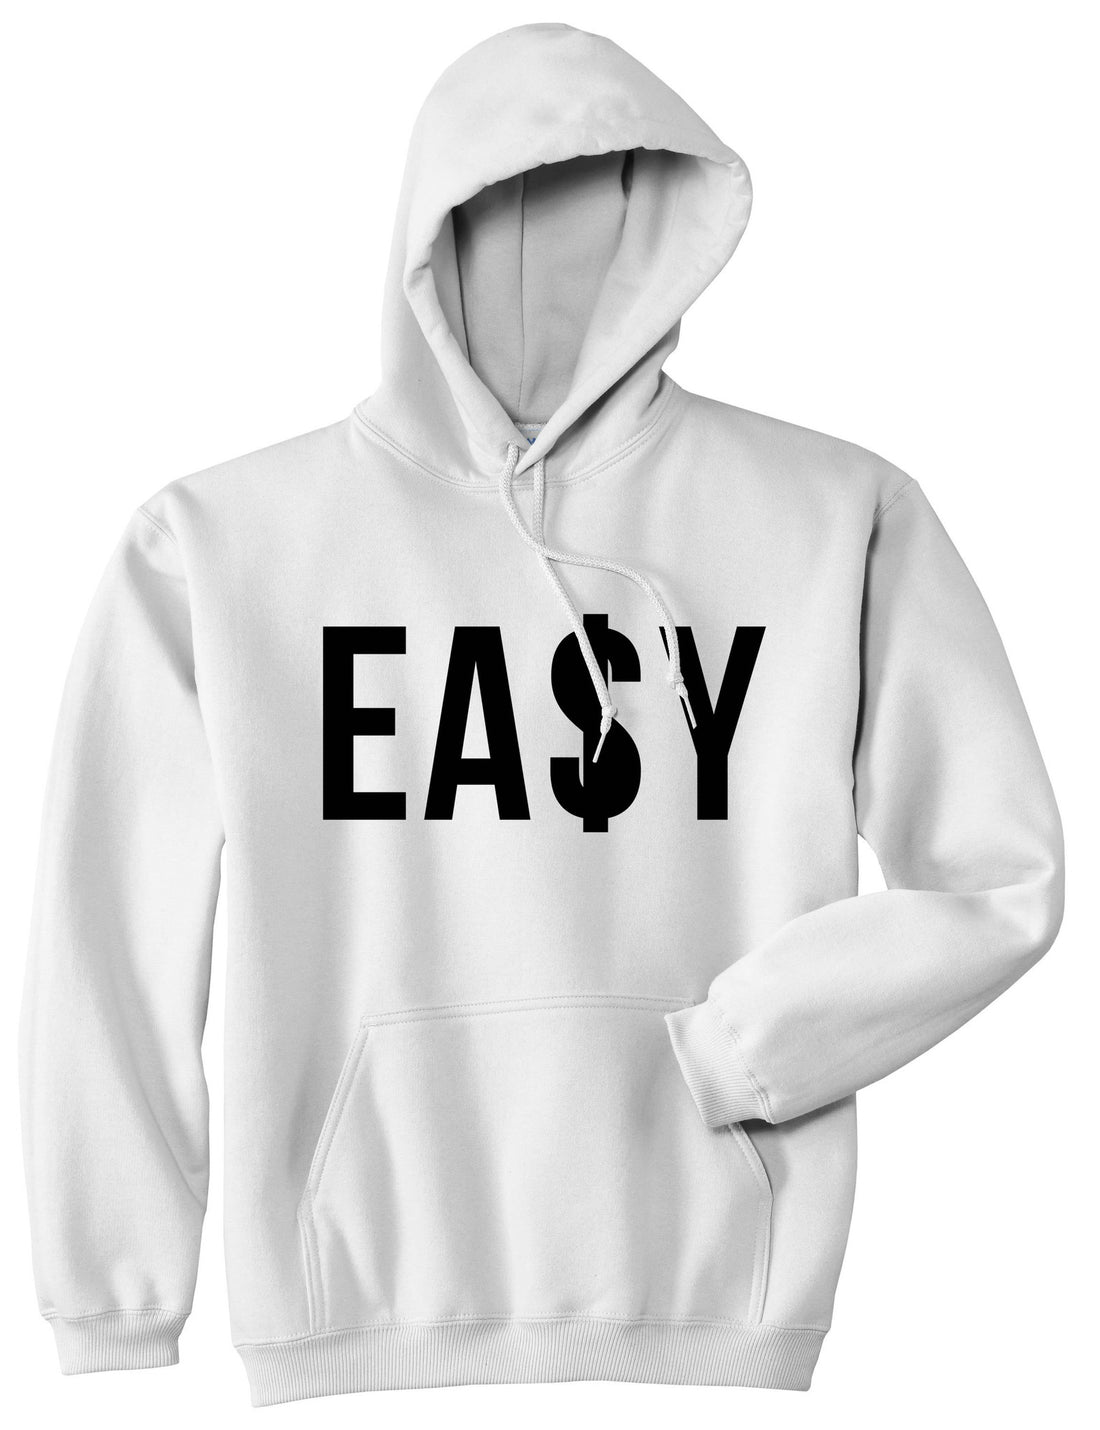 Easy Money Big High Dope Cool Black by Kings Of NY Pullover Hoodie Hoody in White by Kings Of NY